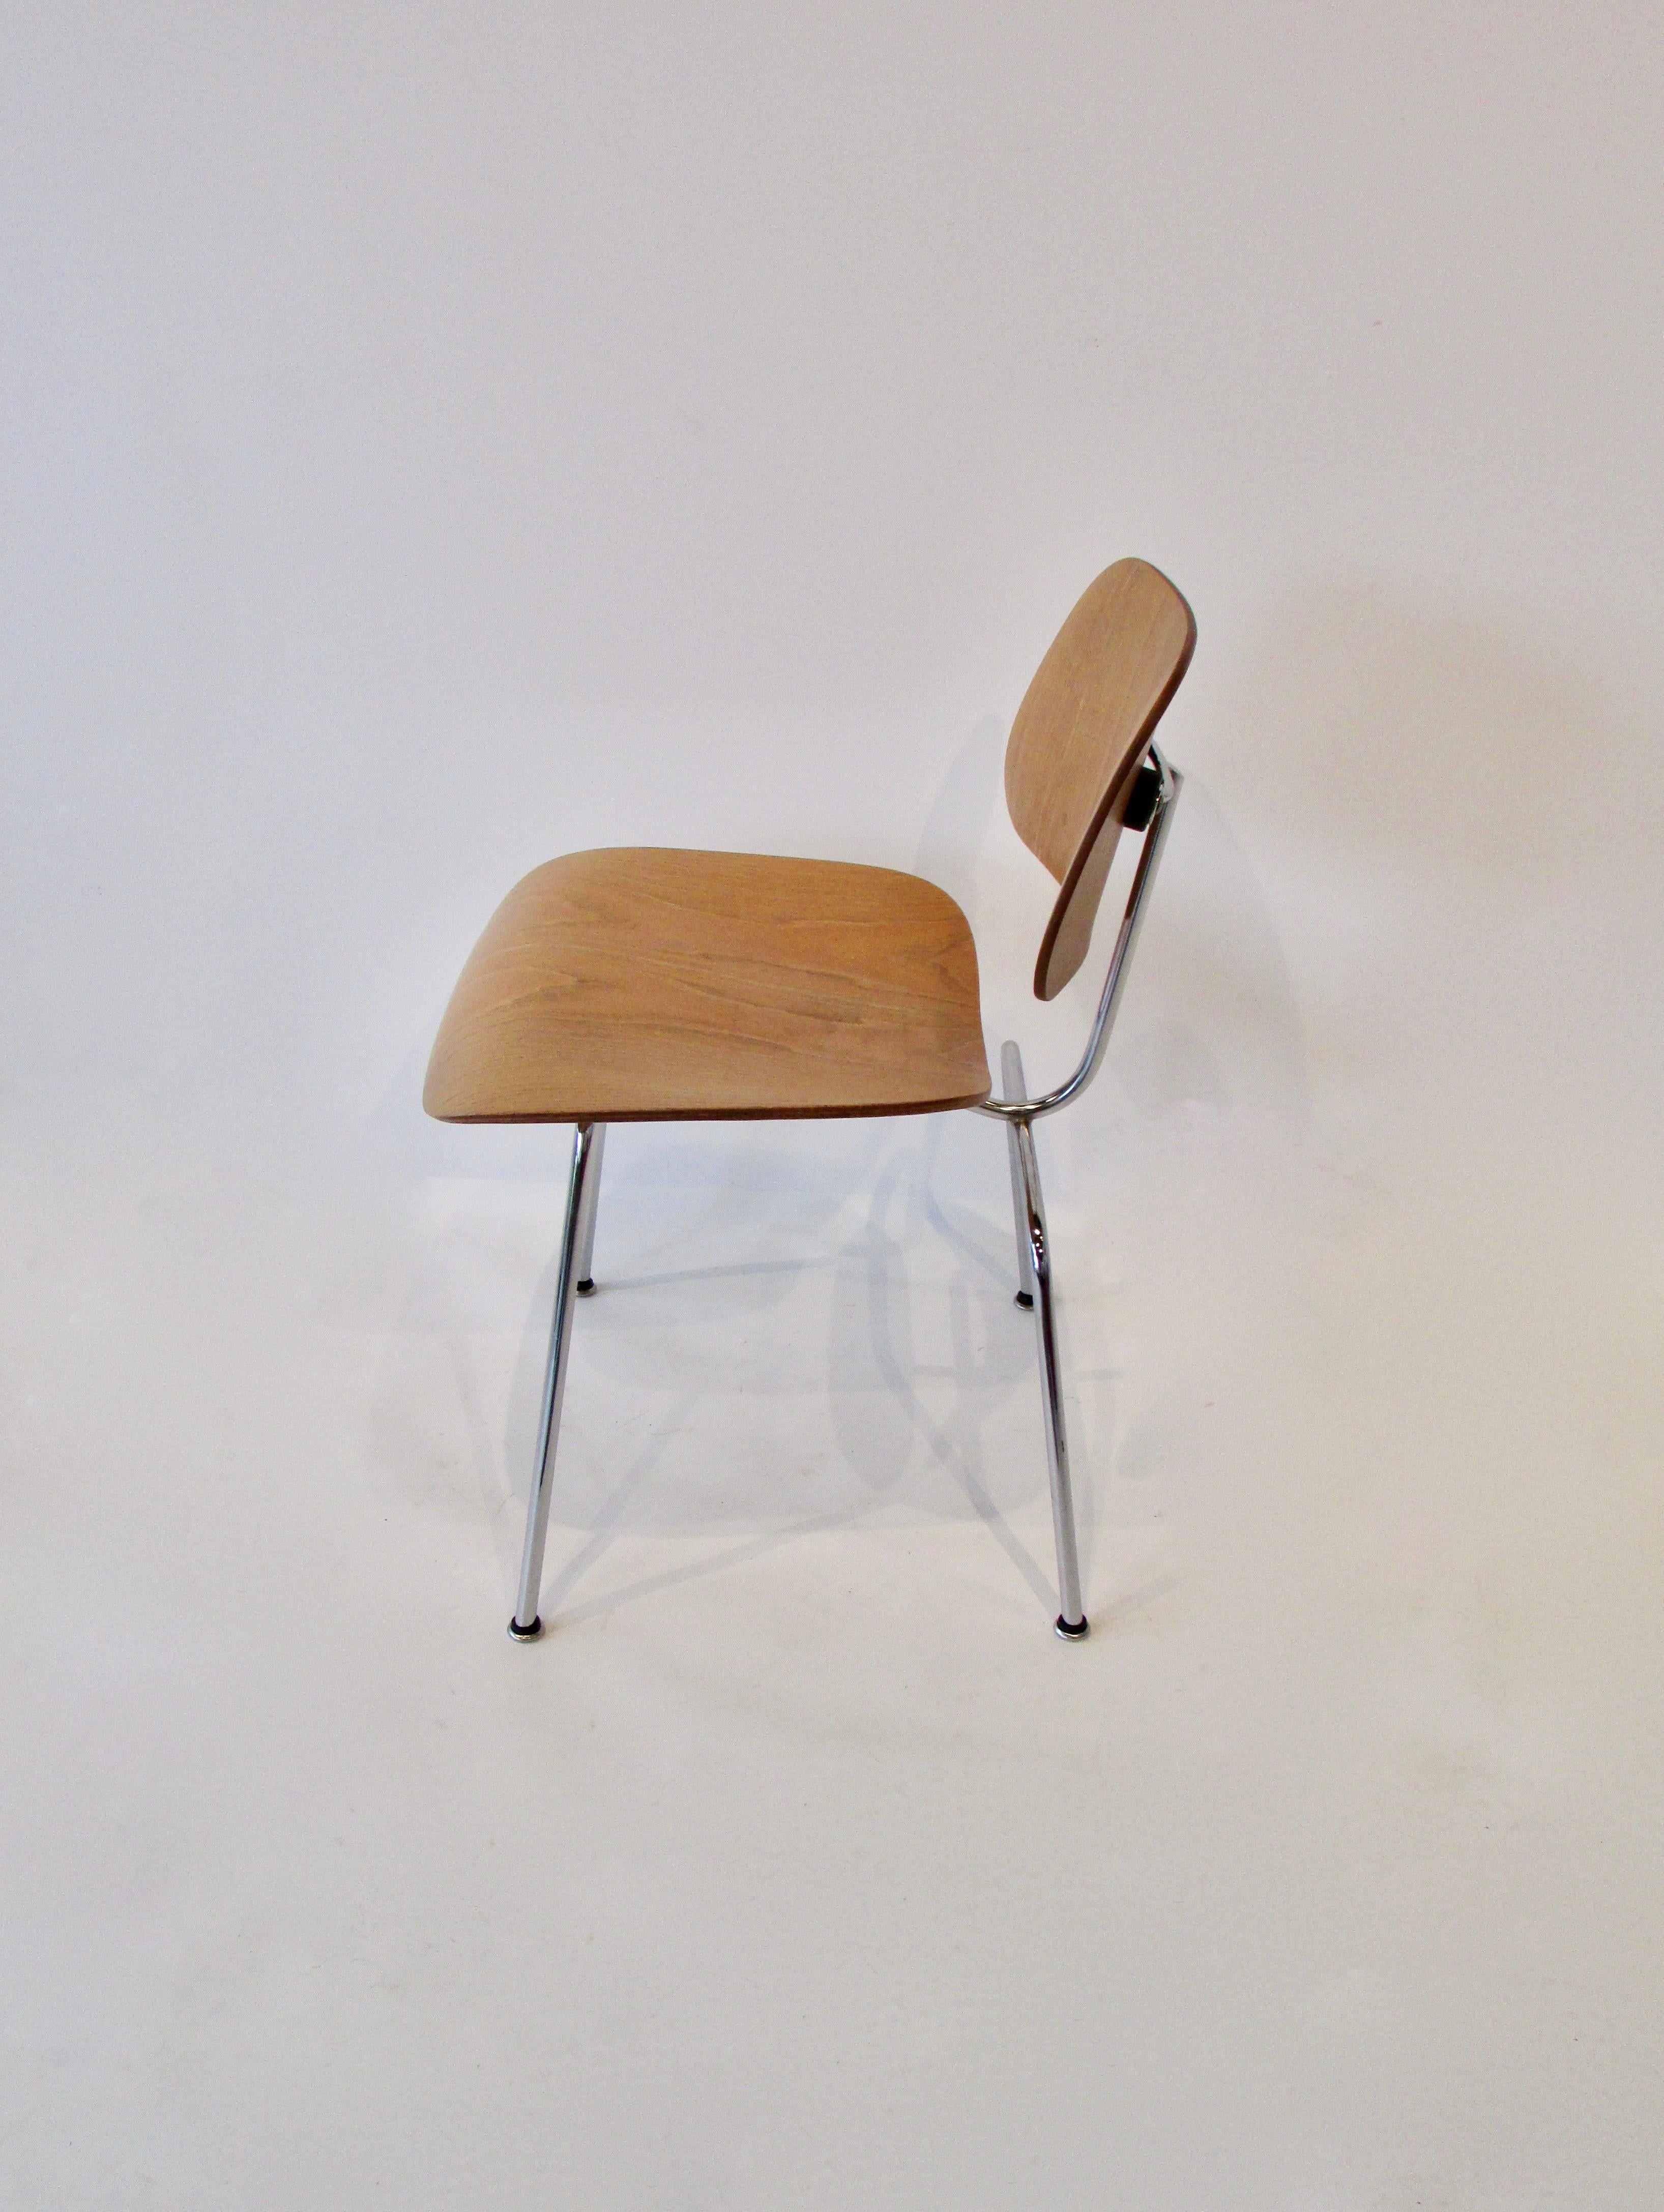 Fine Charles Eames for Evans Sold by Herman Miller Ash Grain DCM Dining Chair In Good Condition For Sale In Ferndale, MI